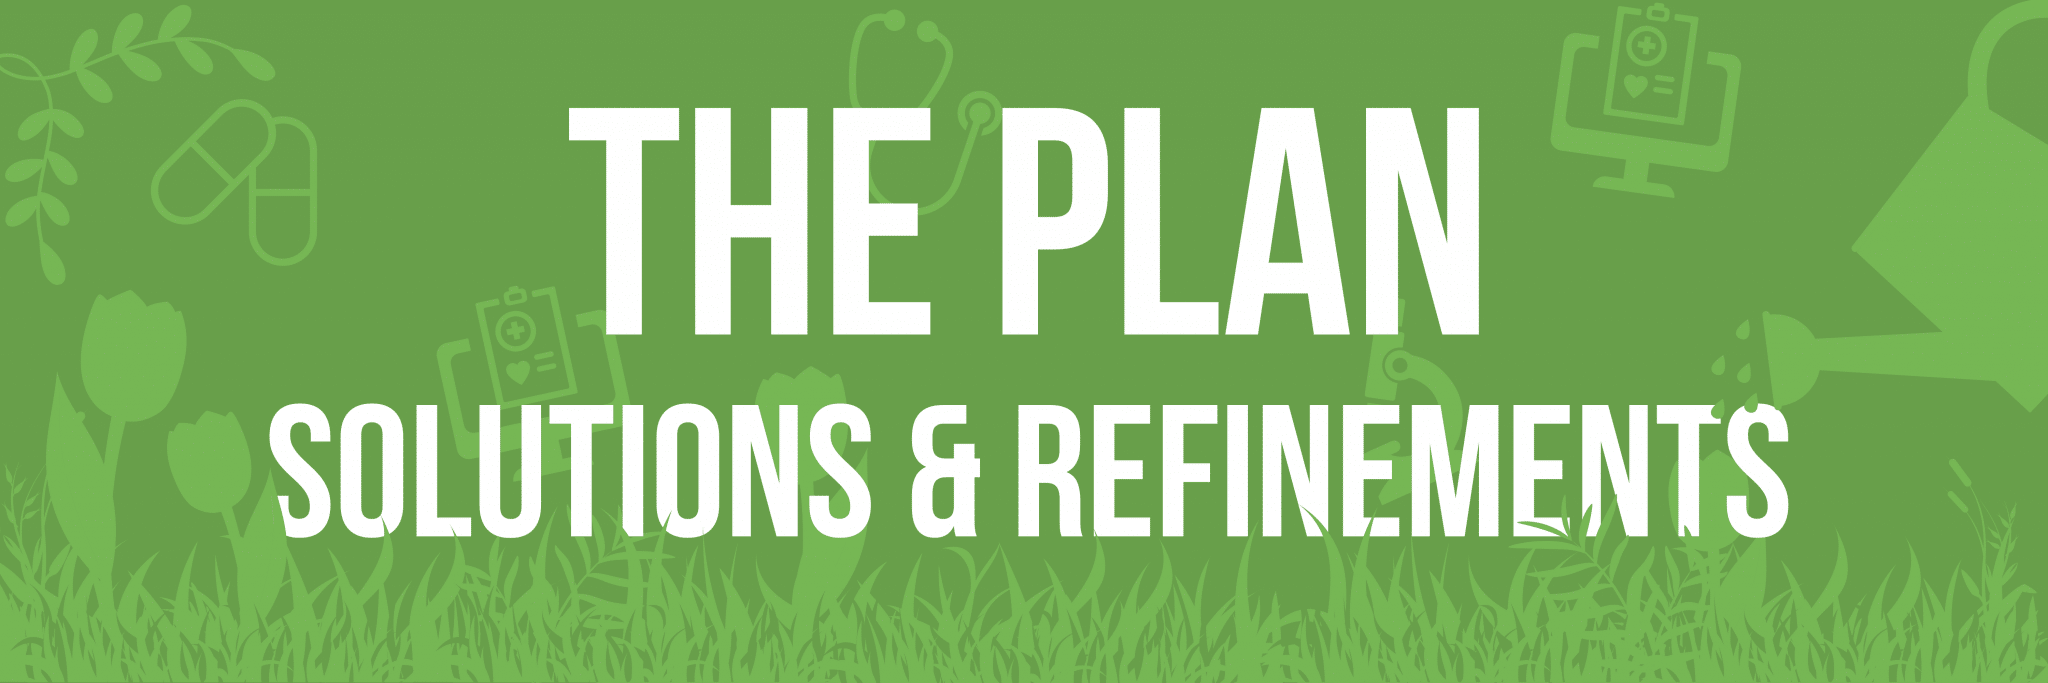 THE PLAN: SOLUTIONS & REFEINEMENTS